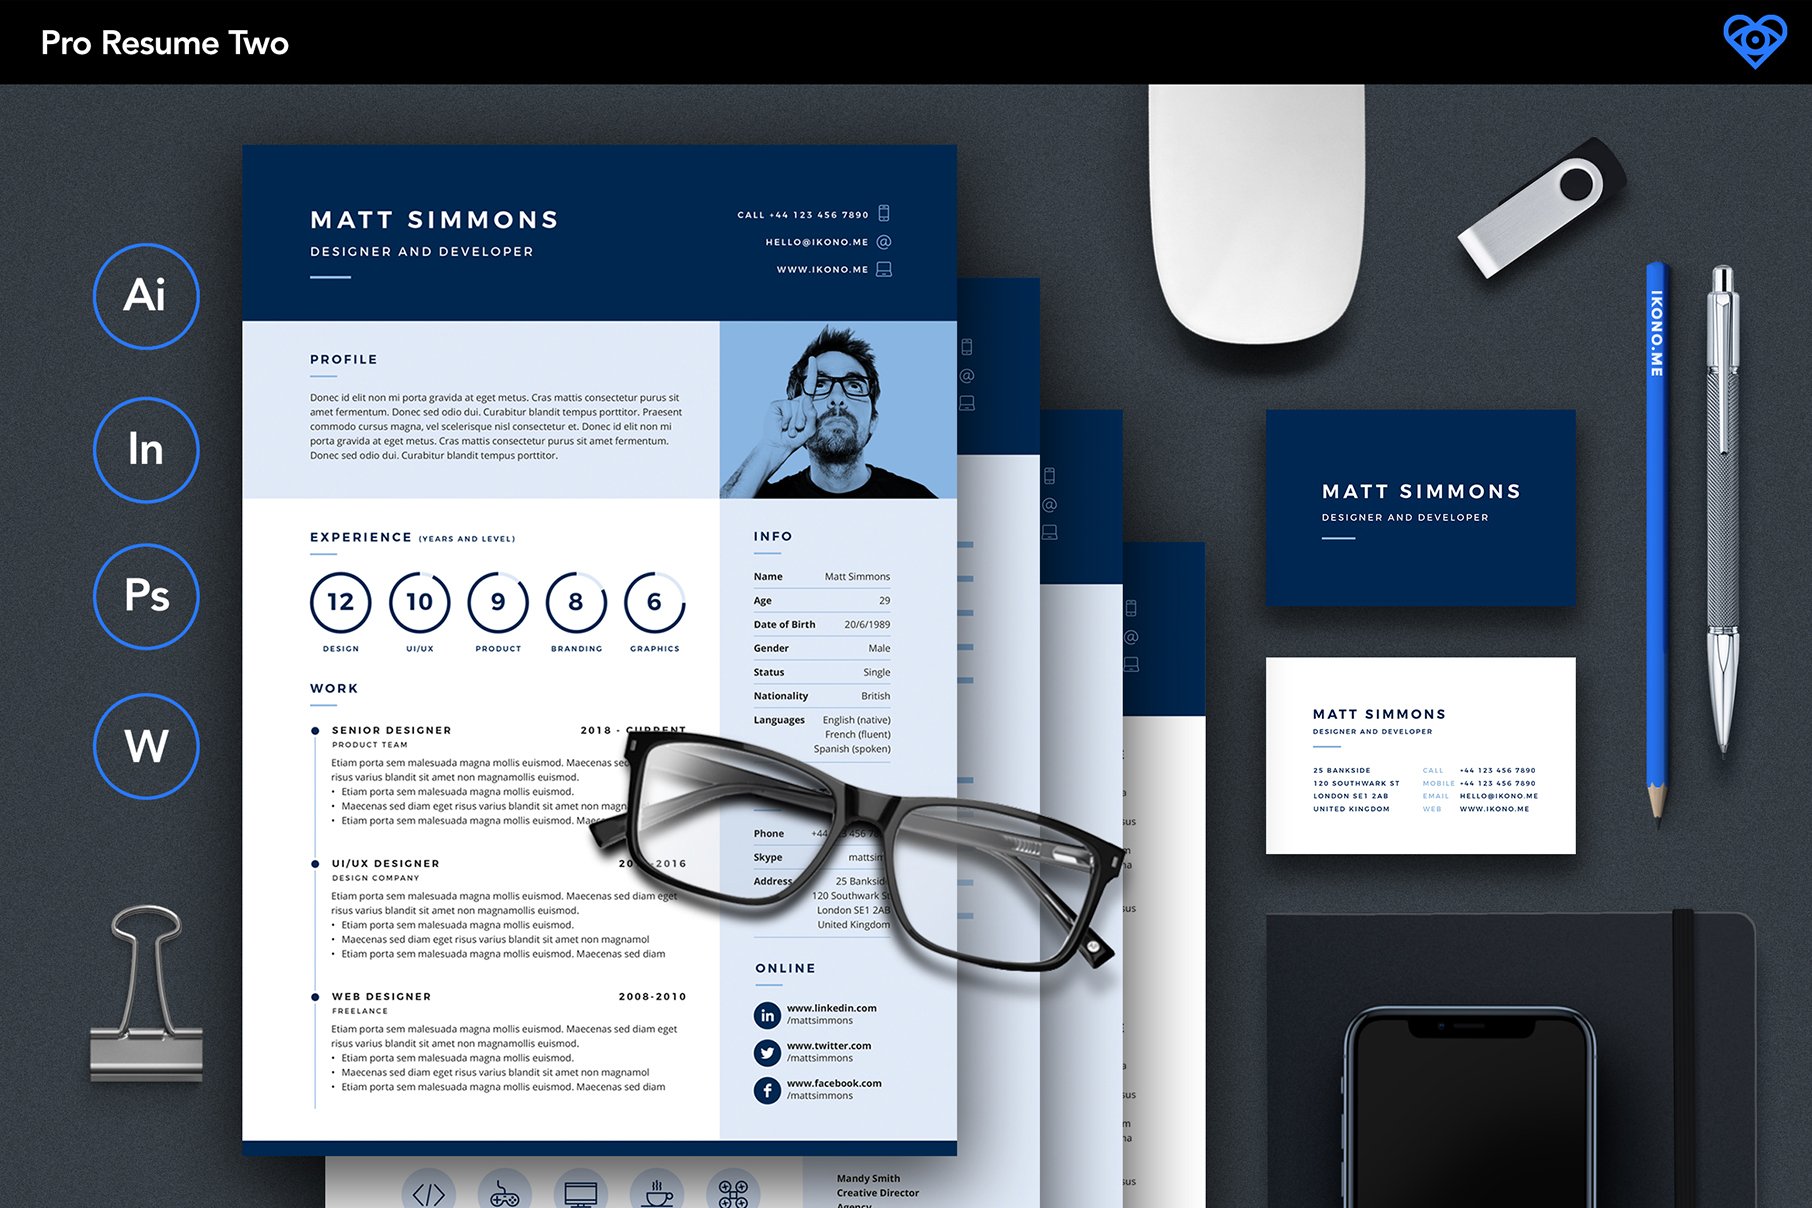 Pro Resume 2 preview image.